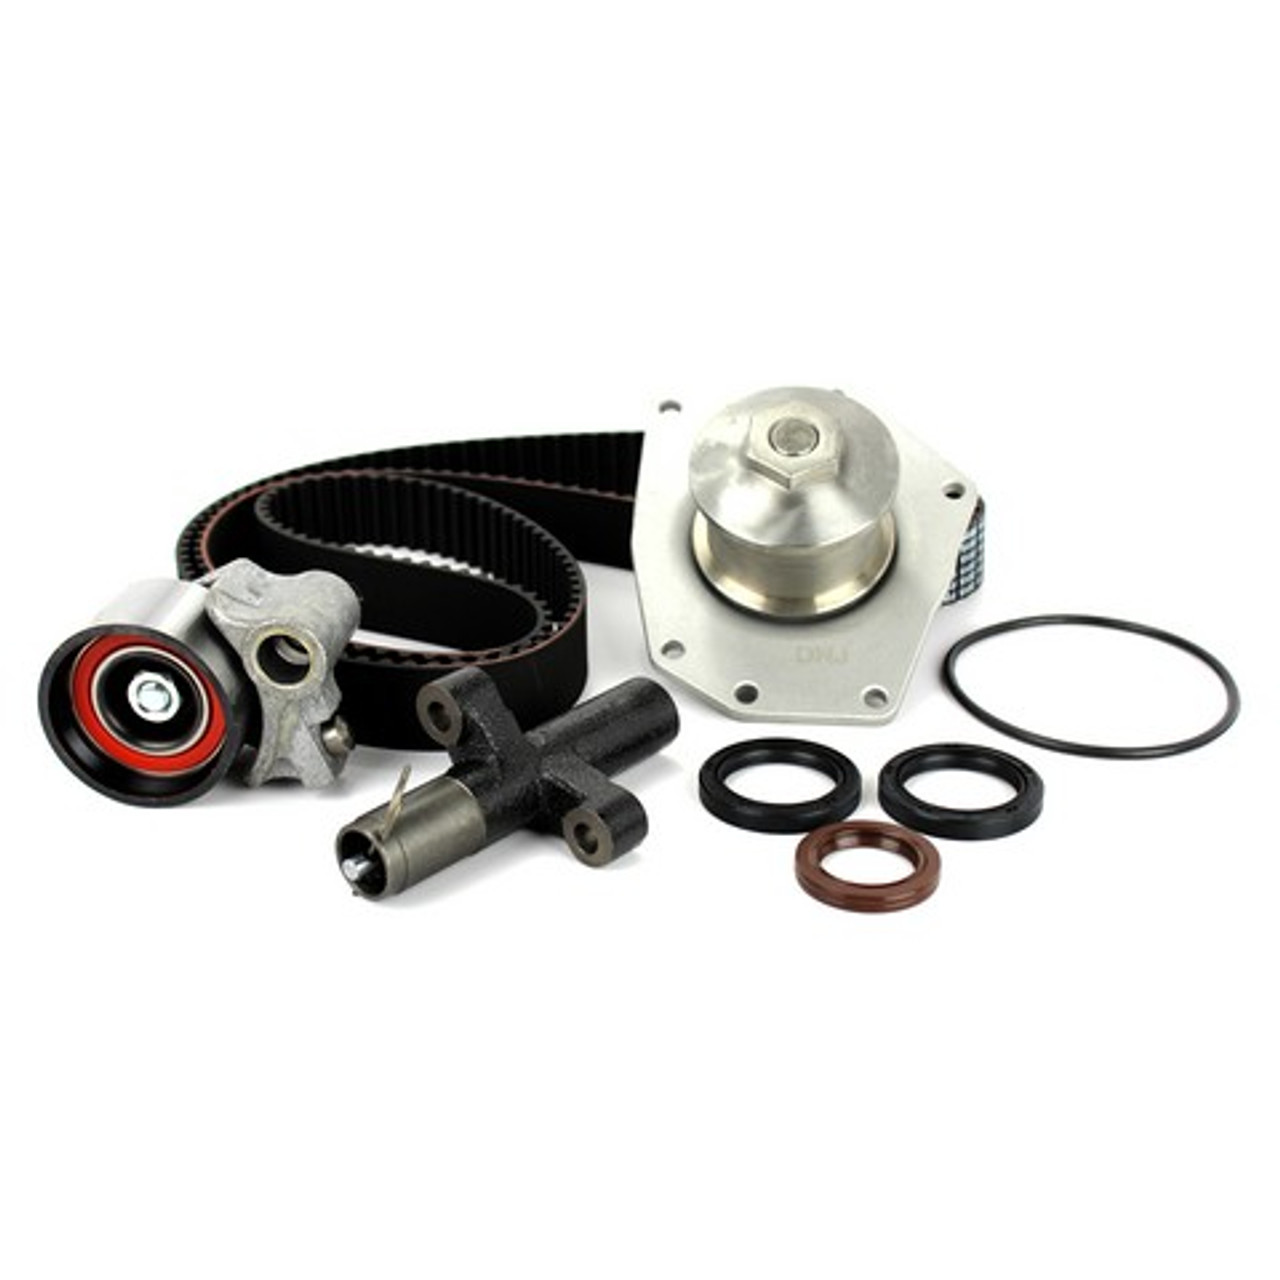 Timing Belt Kit with Water Pump 3.5L 2004 Chrysler Concorde - TBK143WP.13